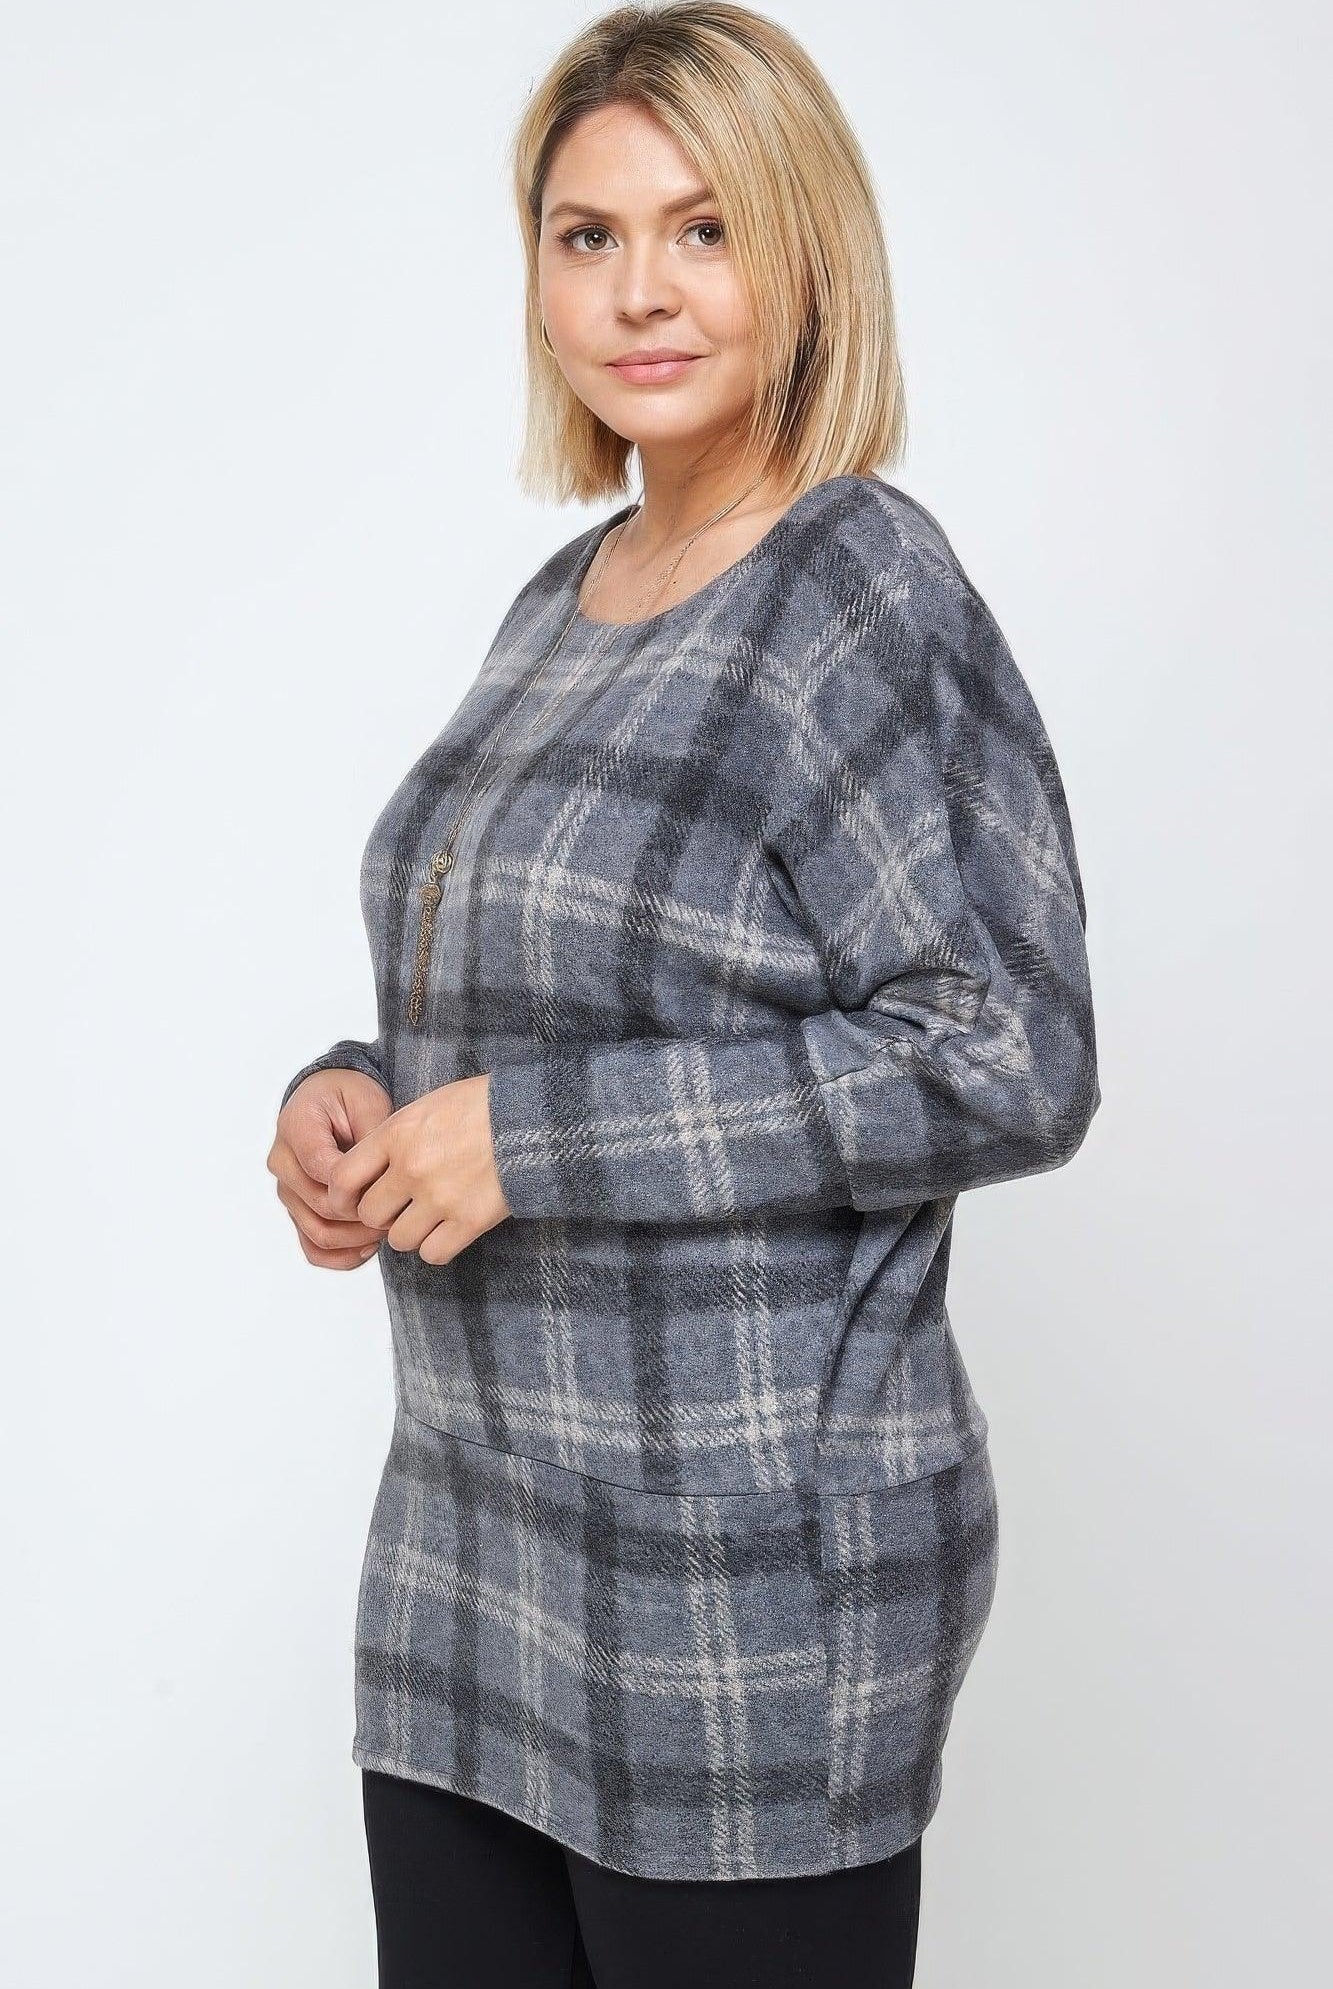 Women's Shirts Boat Neck, Plaid Print Tunic Top, With Long Dolman Sleeves